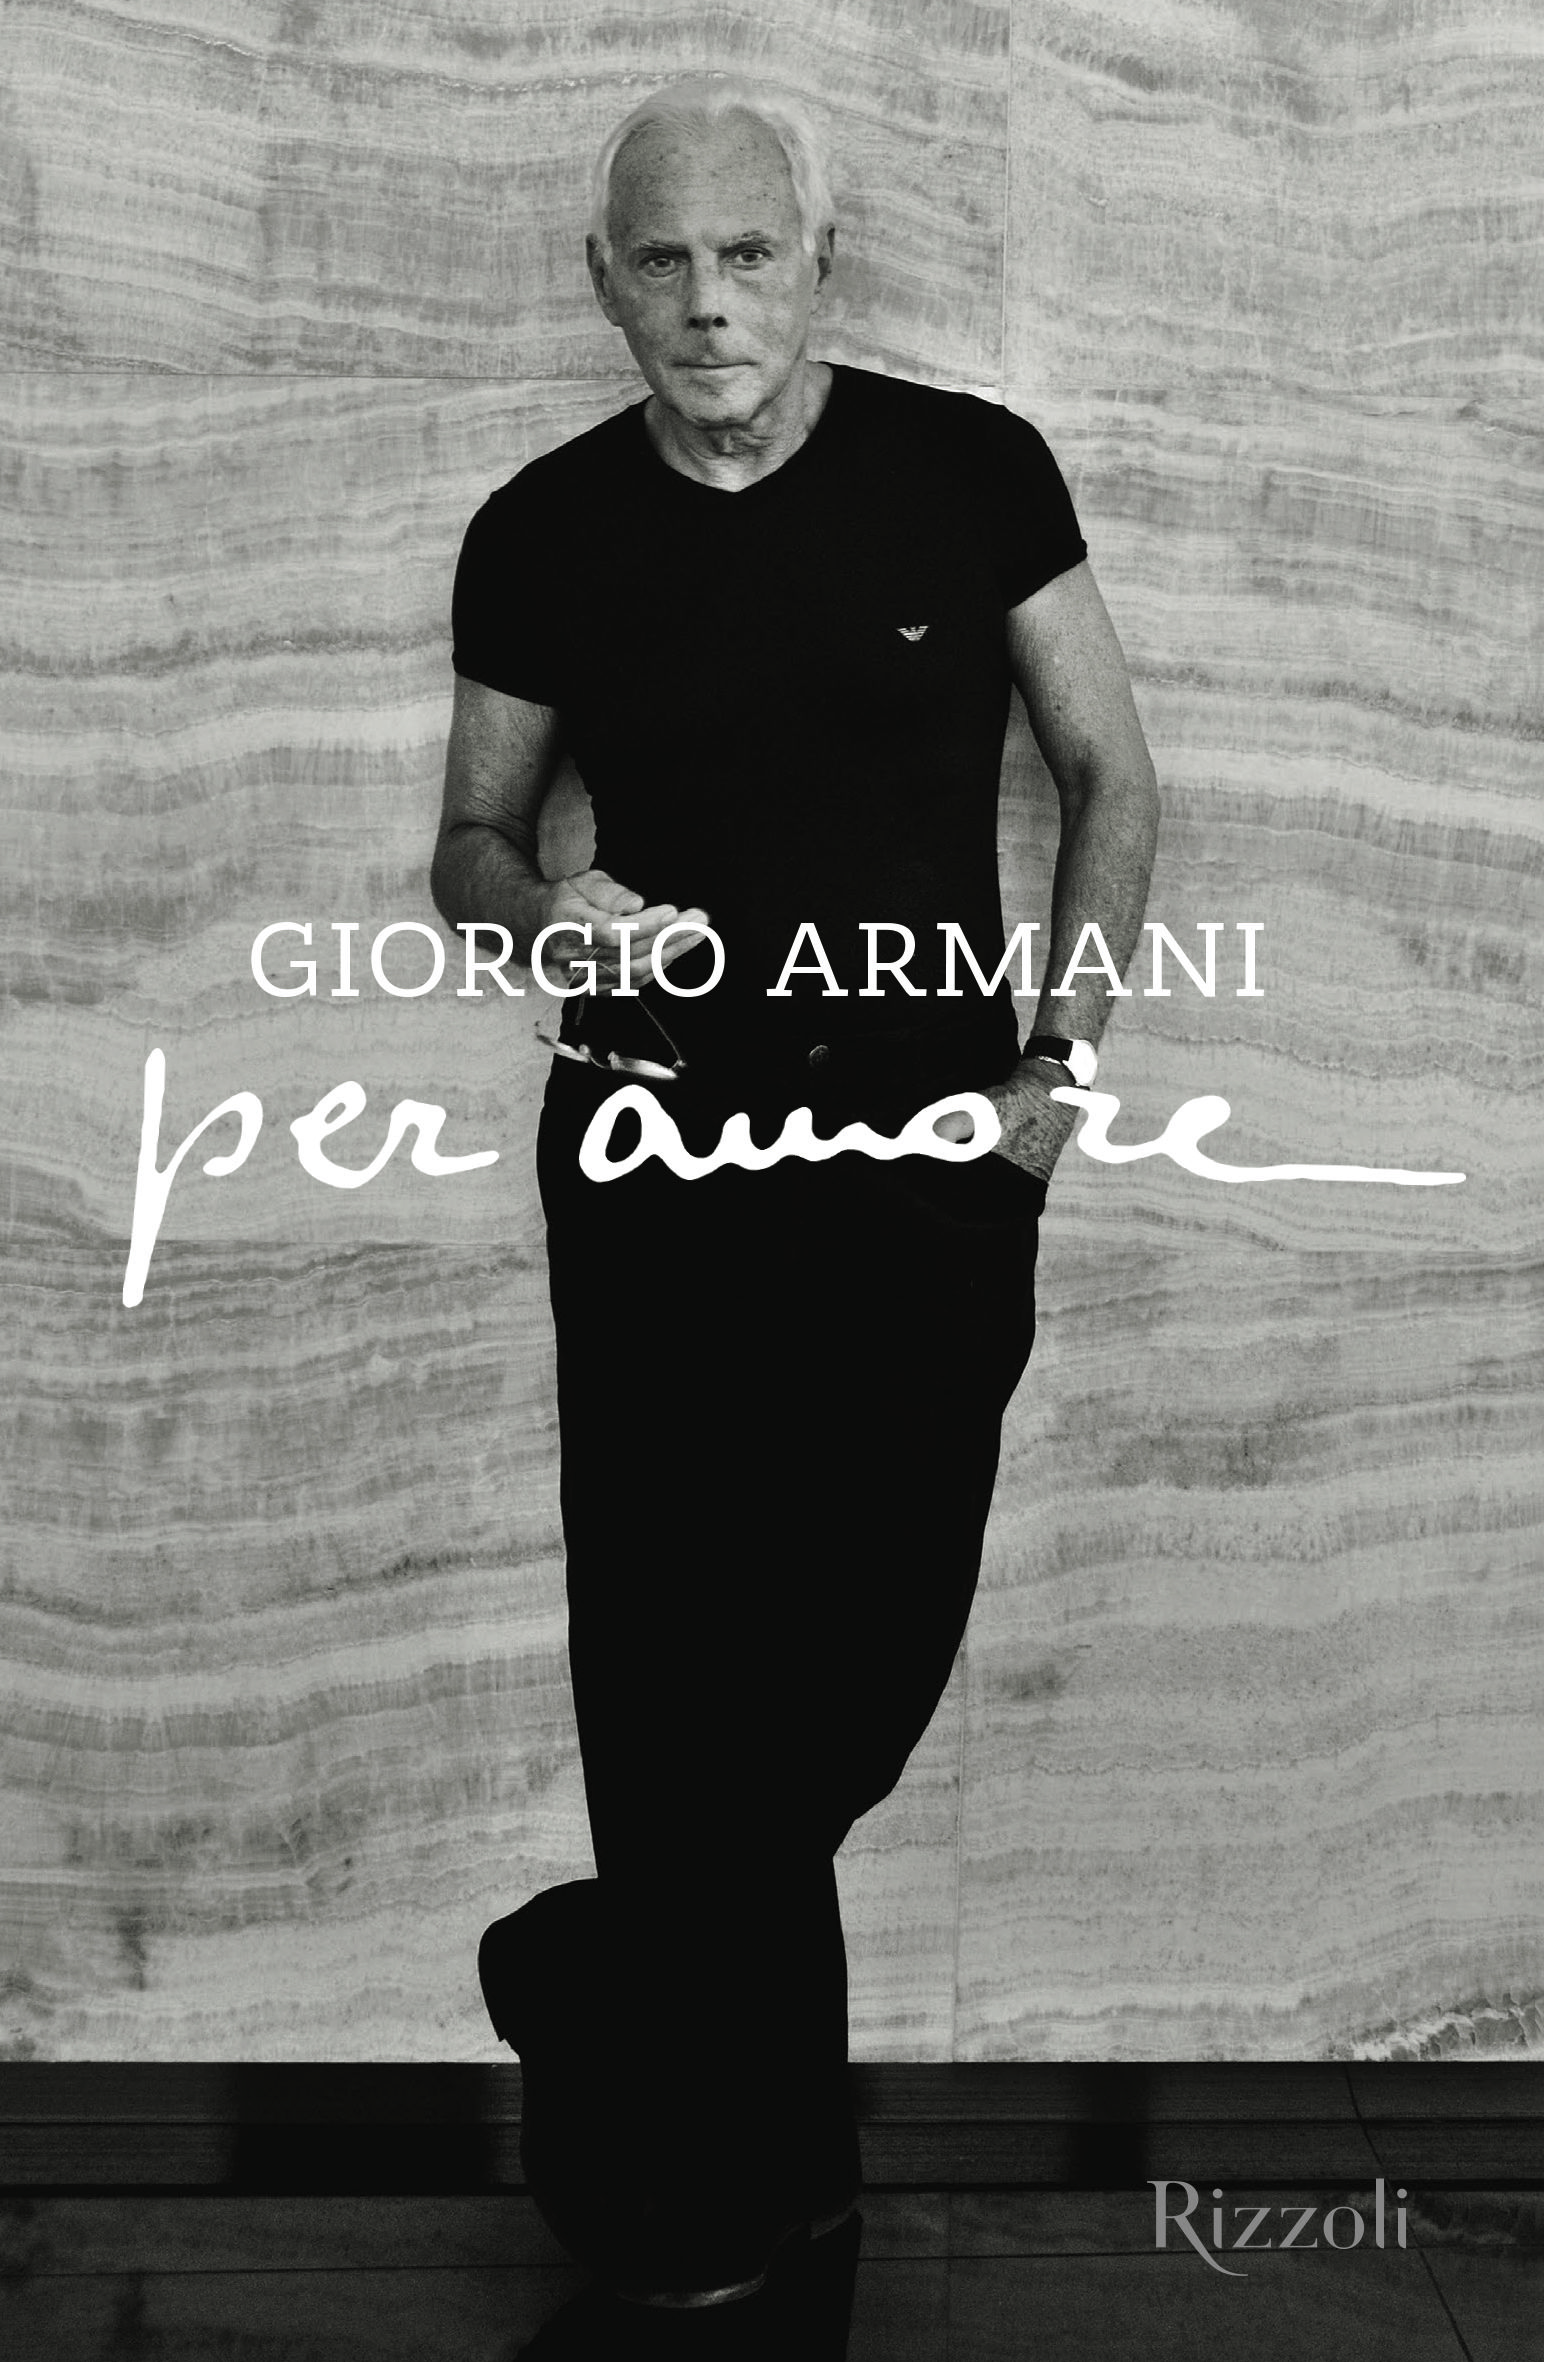 Giorgio Armani Speaks Up About Helping Out